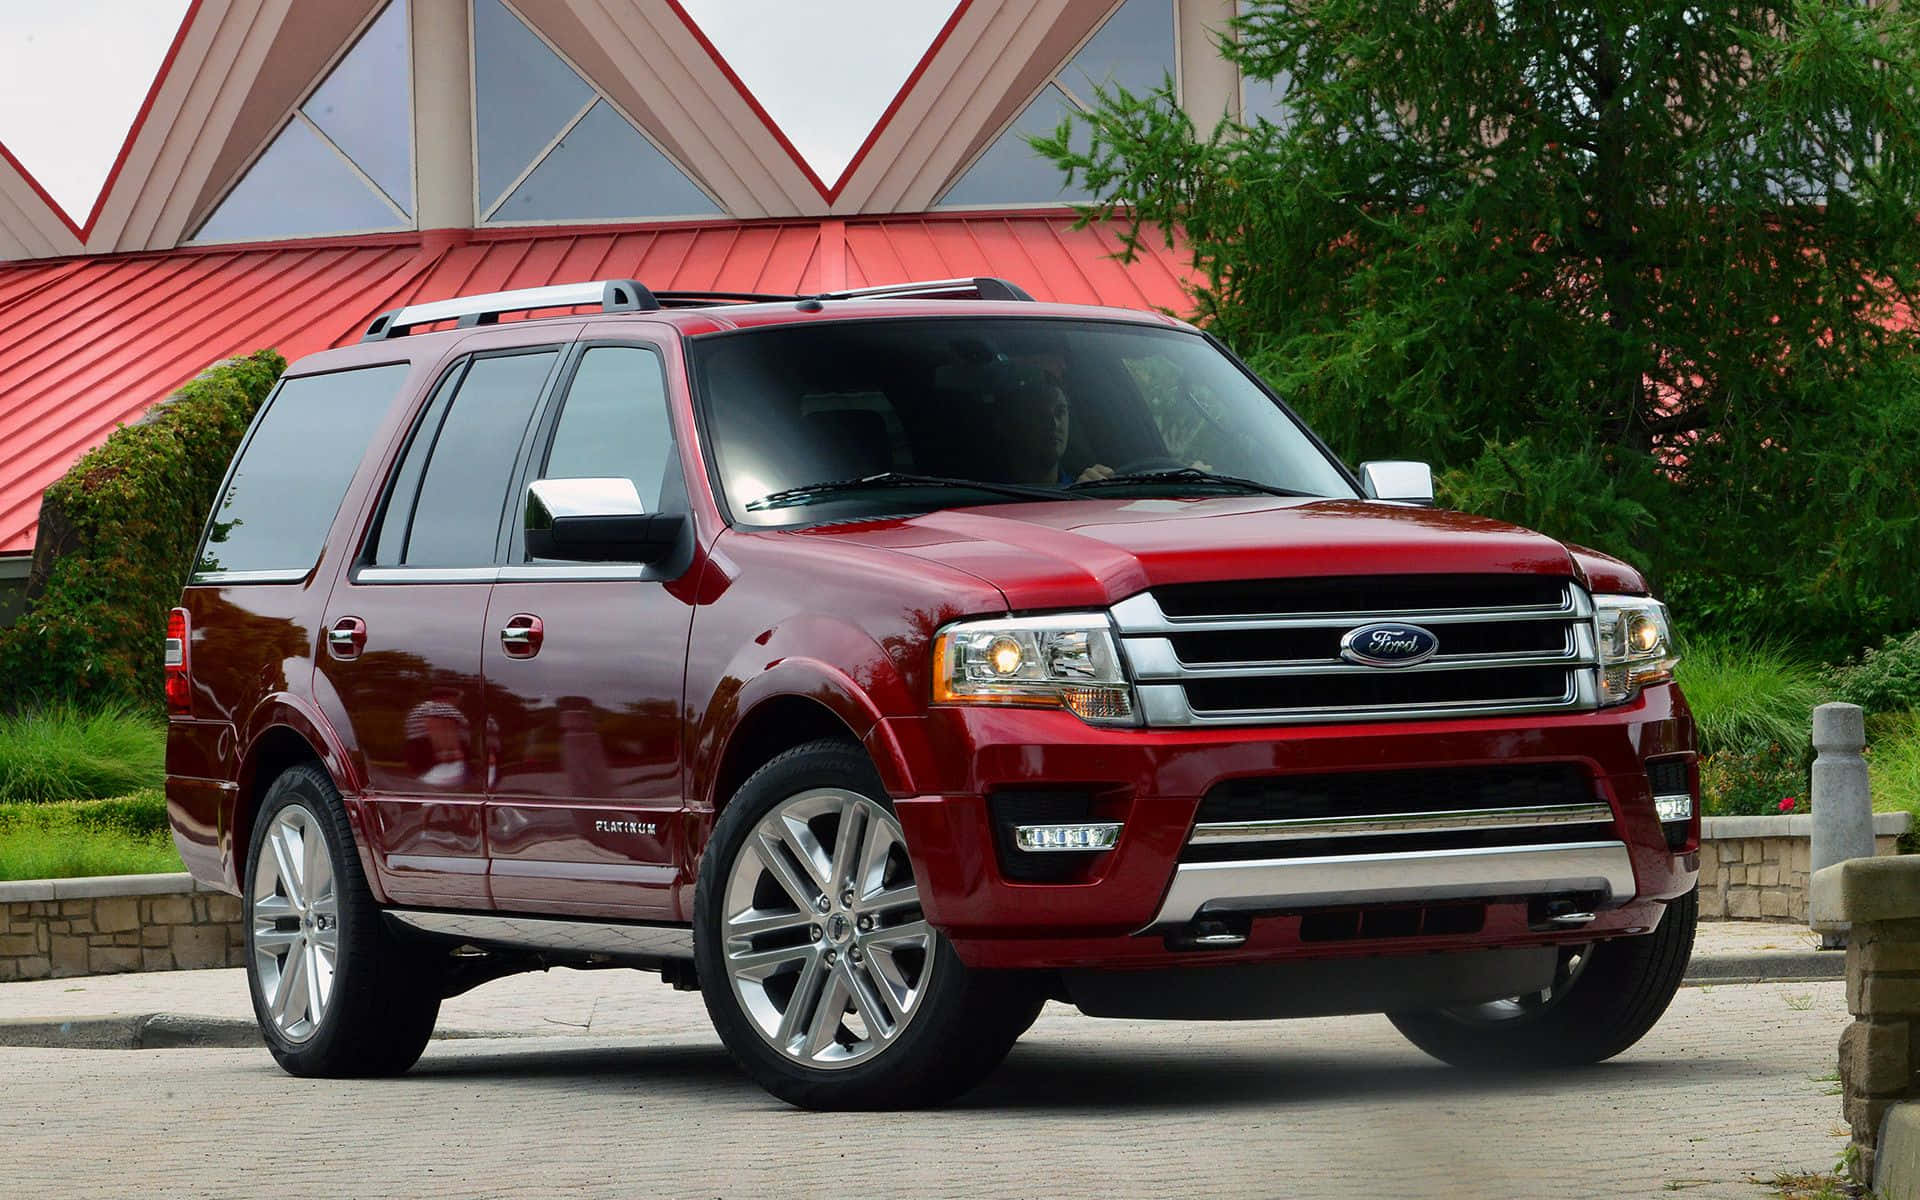 Stylish Ford Expedition SUV on an Adventurous Road Trip Wallpaper